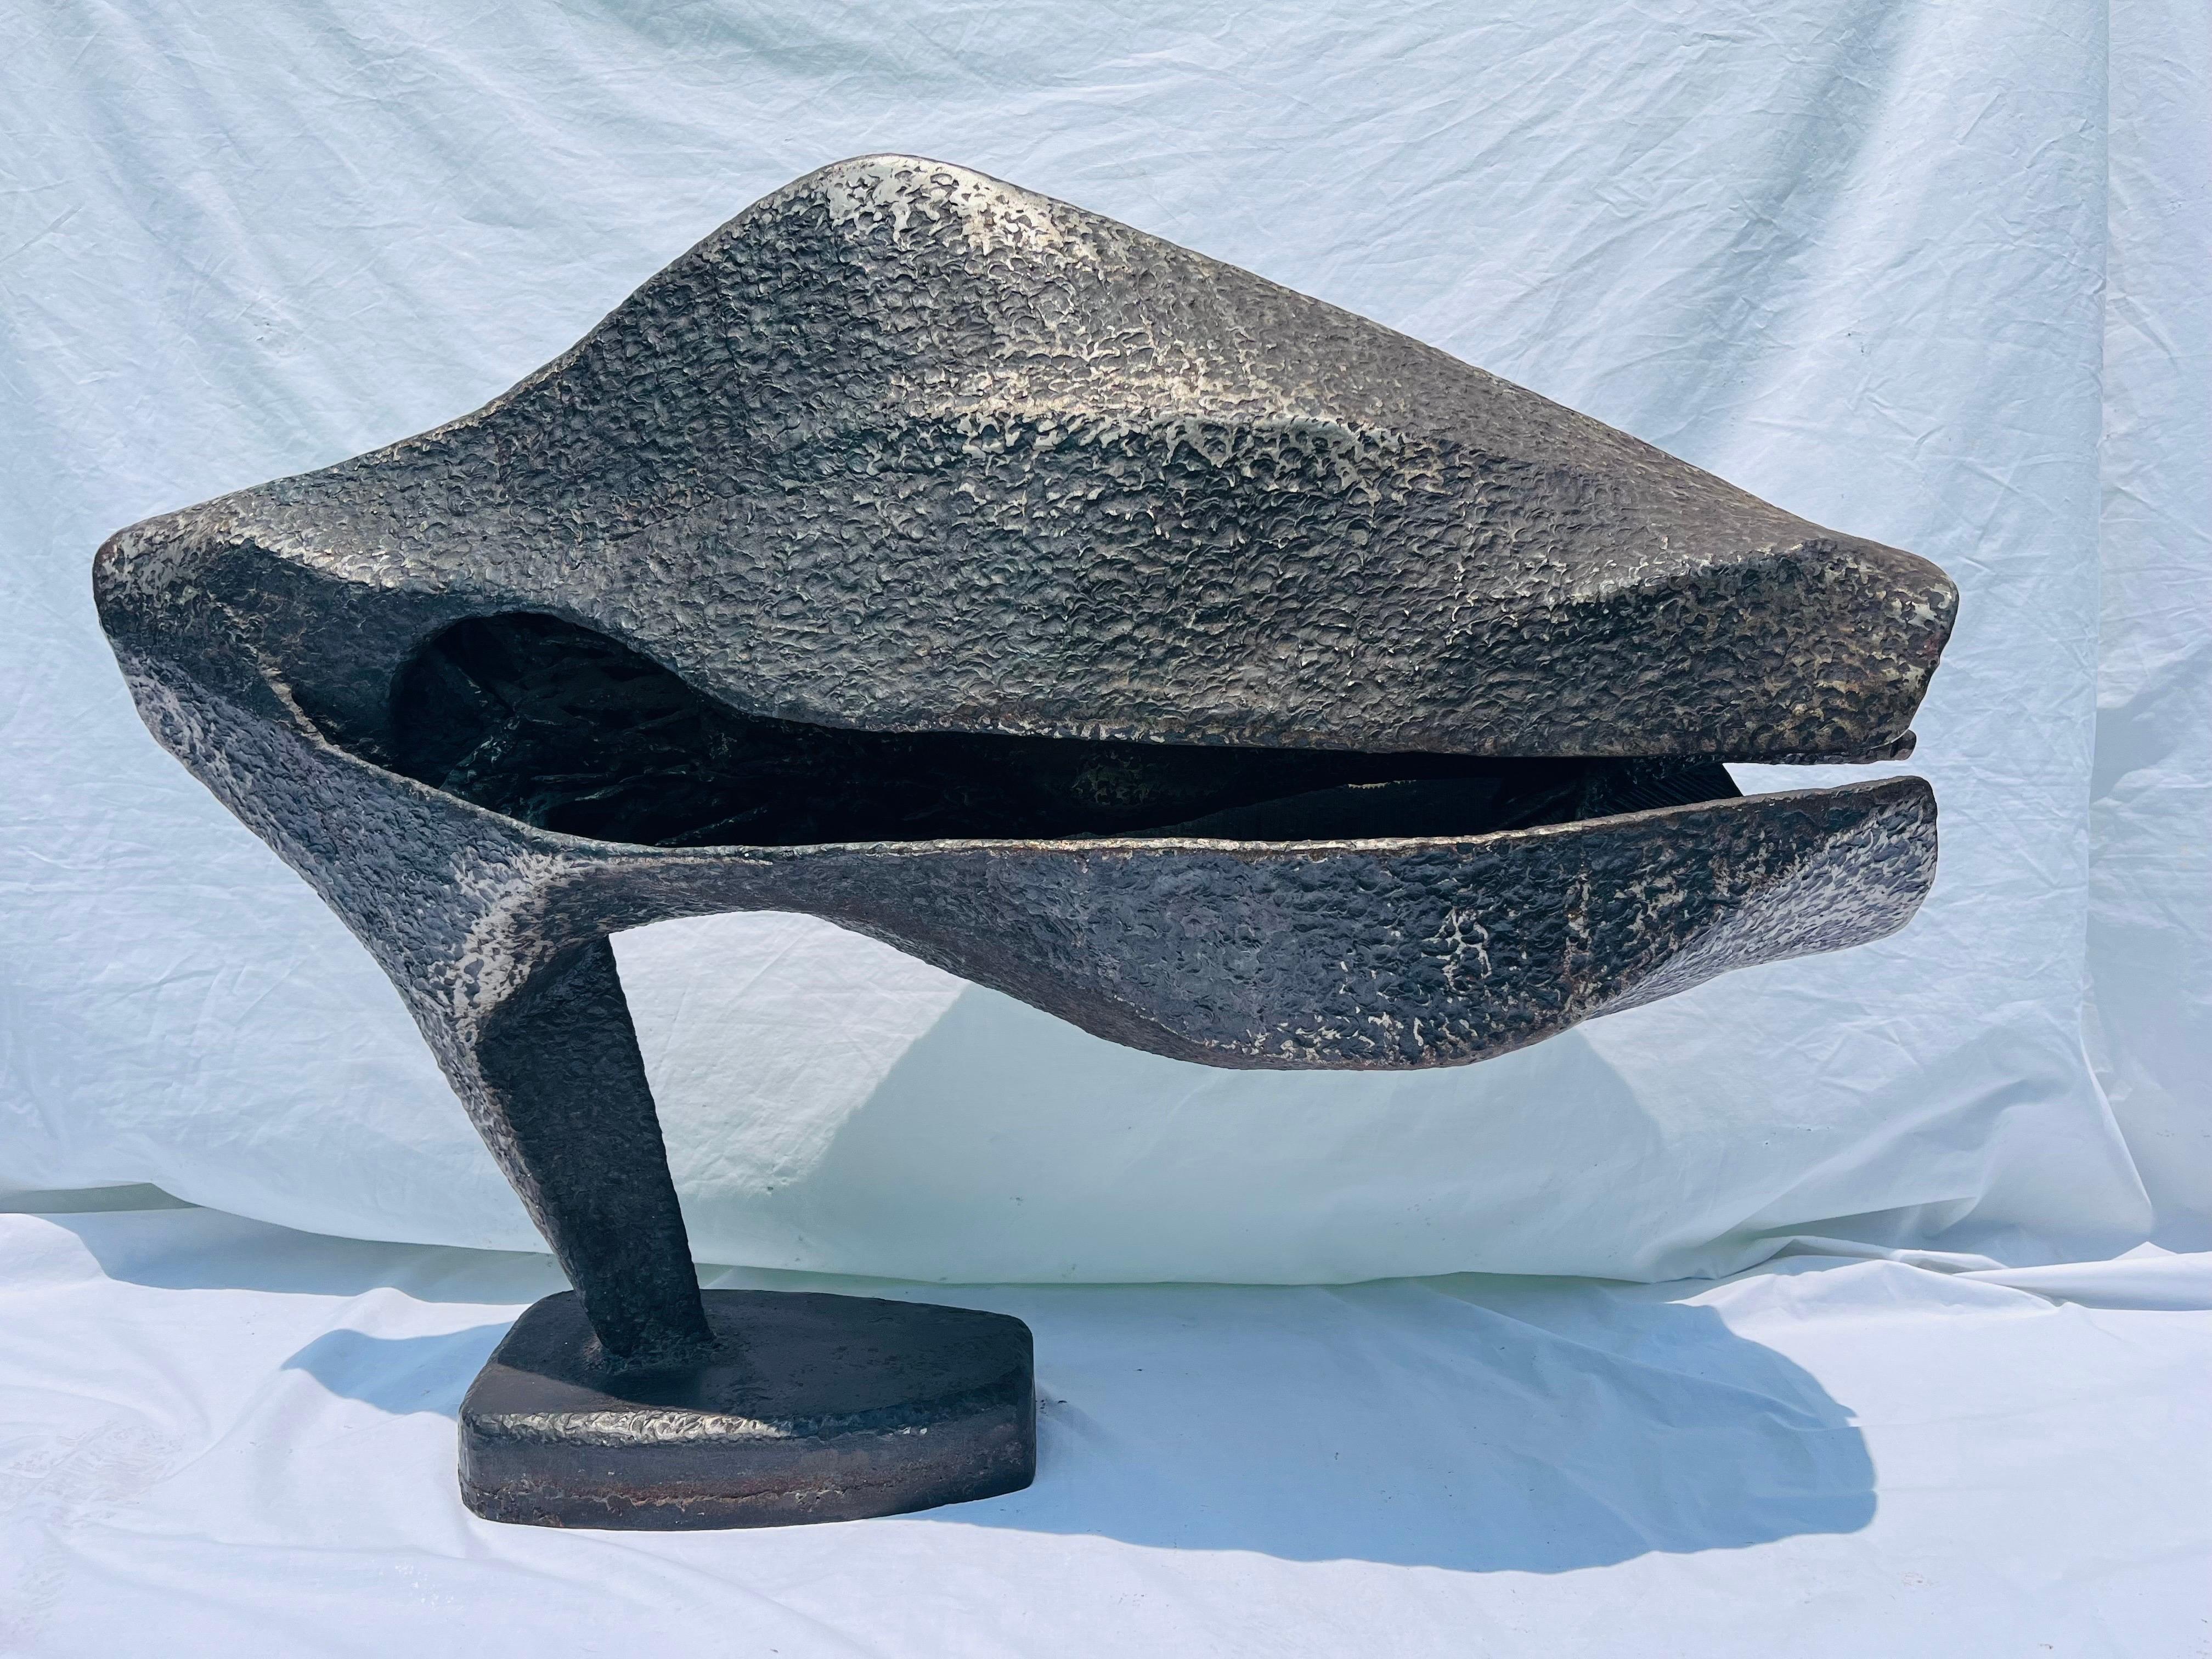 A truly monumental work of art. At three and a half feet wide and over two feet in height, this incredible abstract sculpture commands attention. The non representational, abstract, biomorphic form is the purest embodiment of abstract art, thus